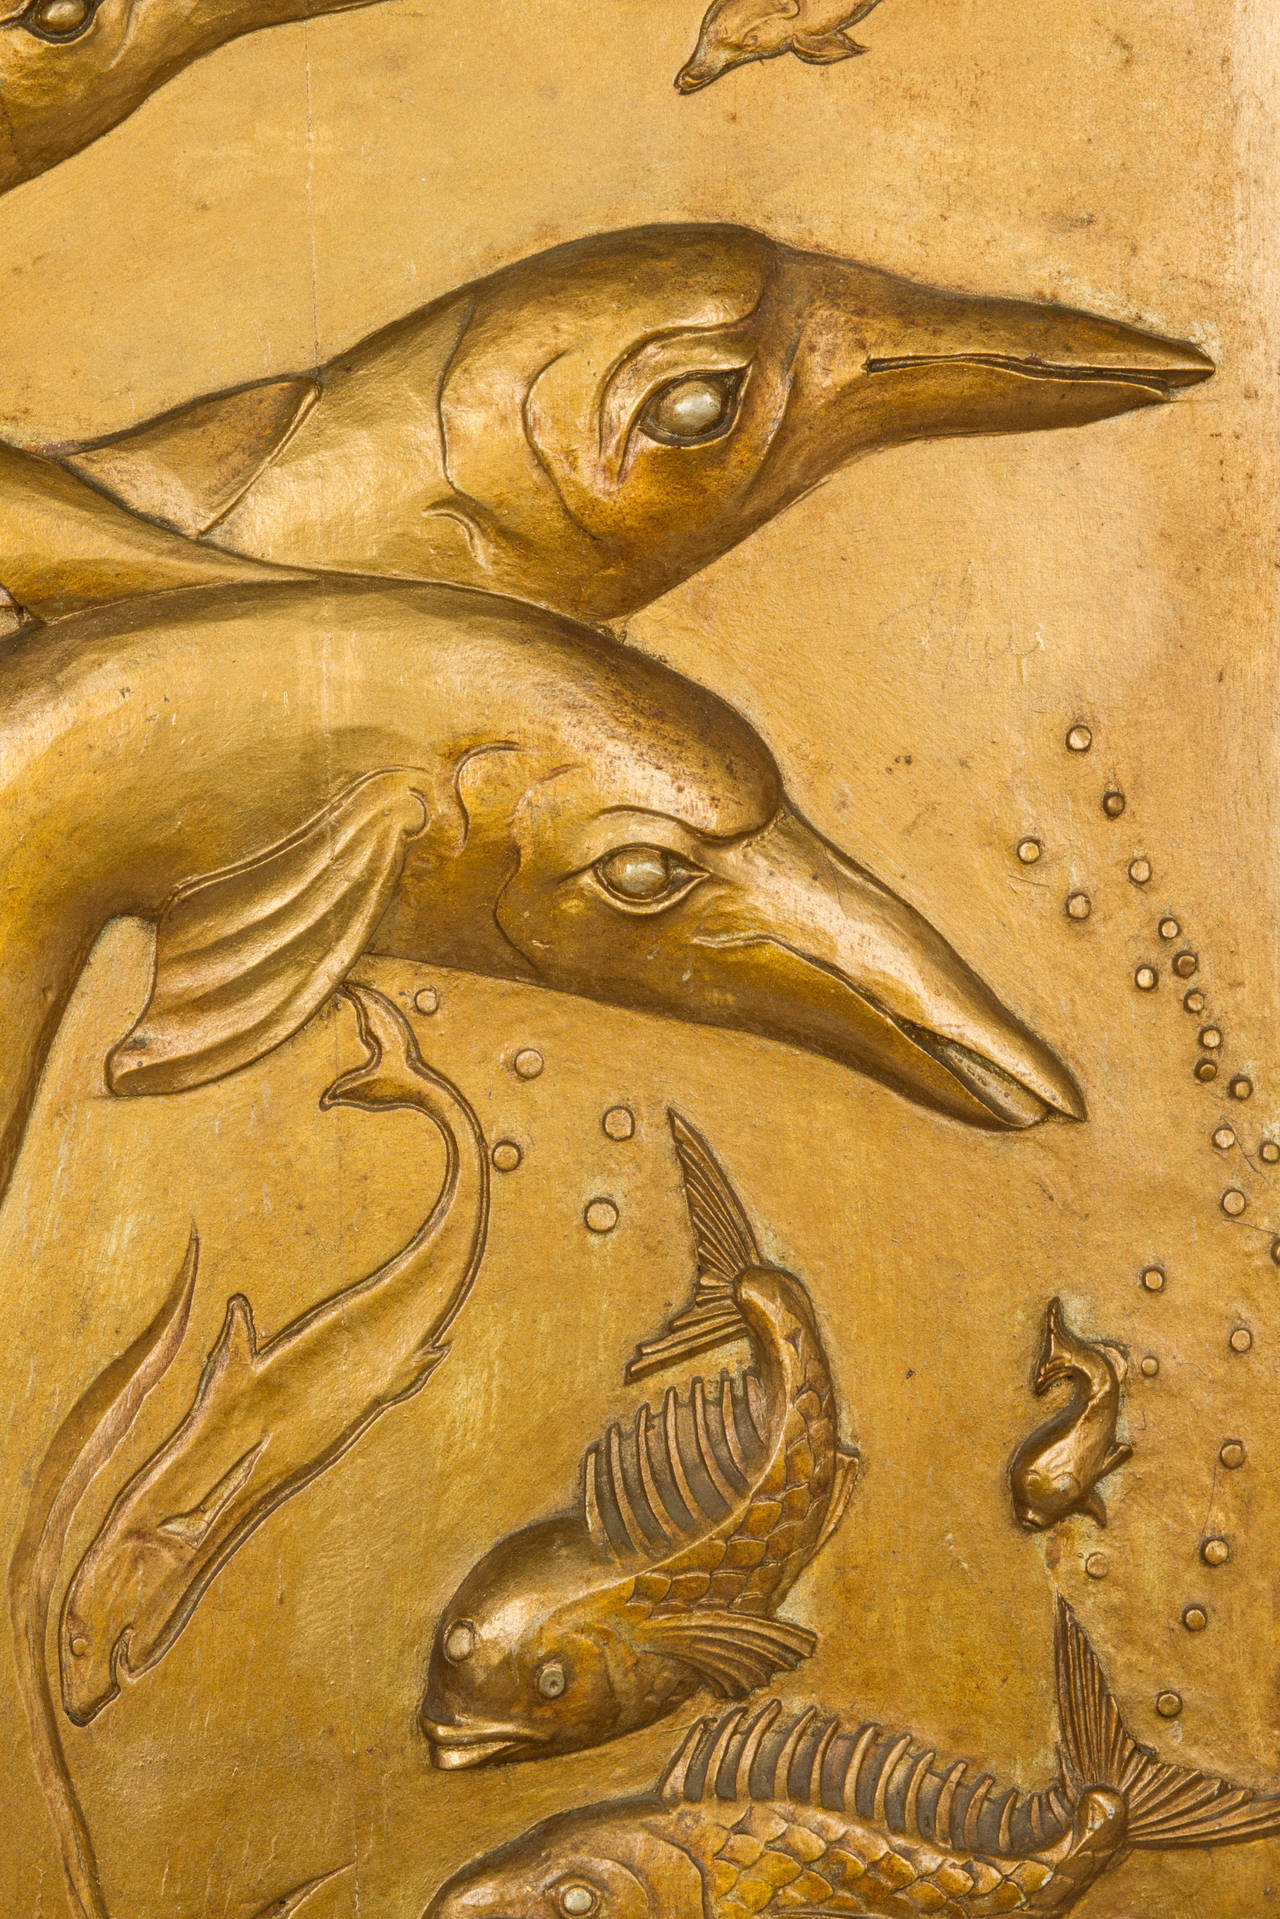 This is an interesting, whimsical piece depicting porpoise, and fish in an underwater three dimensional scene.